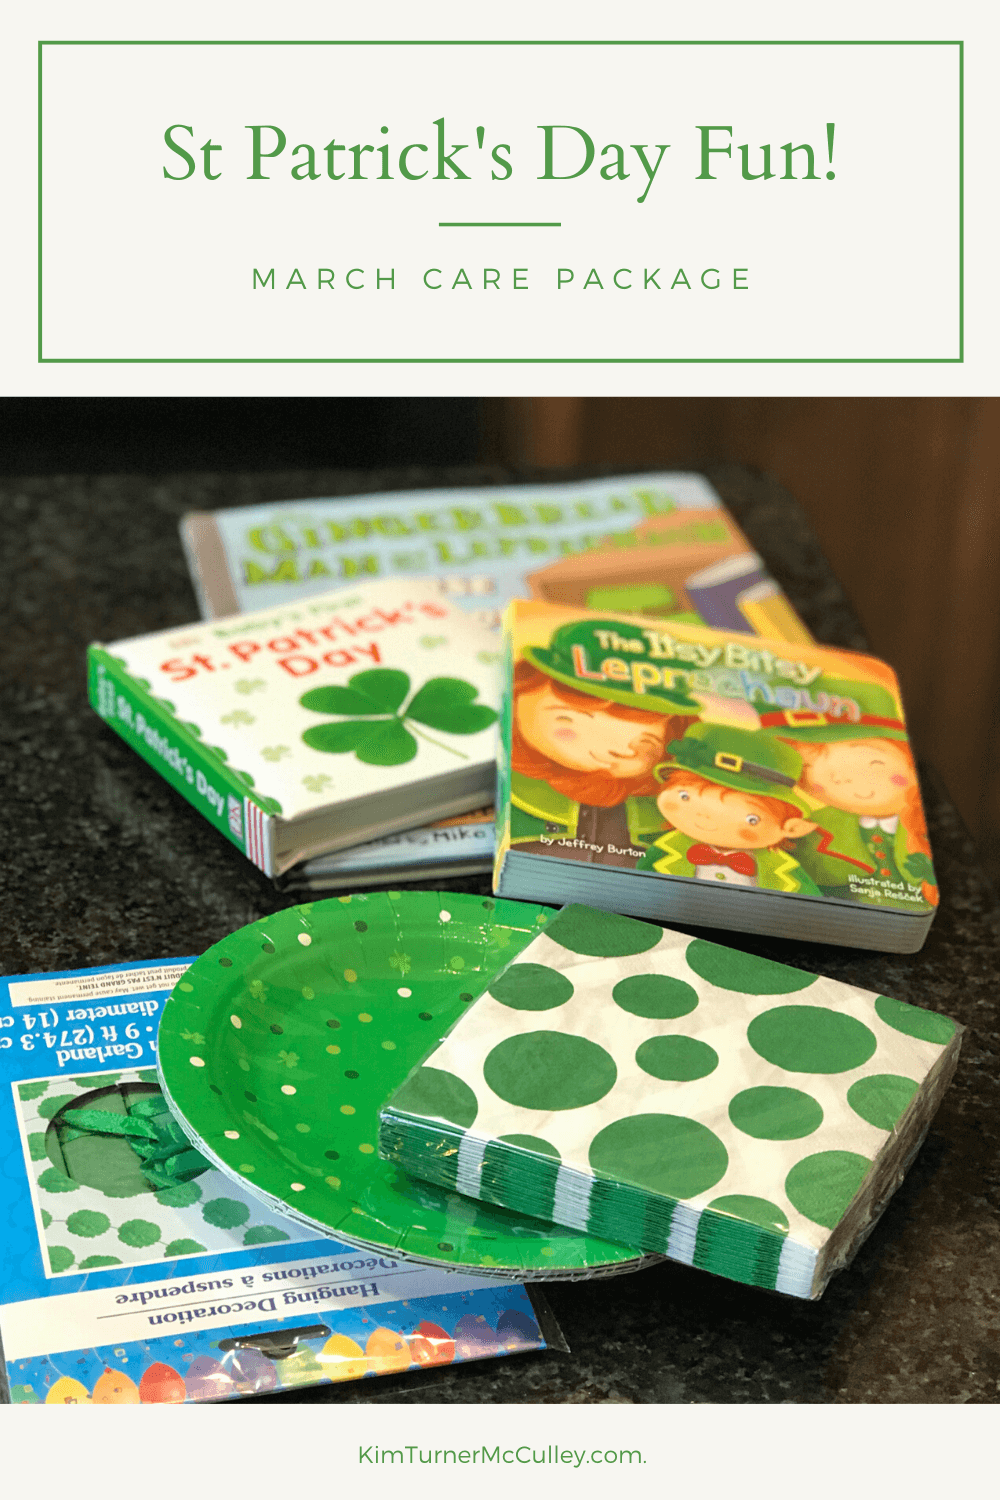 St. Patrick's Day Fun Discover the joy of sending Grammy Boxes/Care Packages to long distance loved ones. A fun way to connect. #carepackageideas KimTurnerMcCulley.com